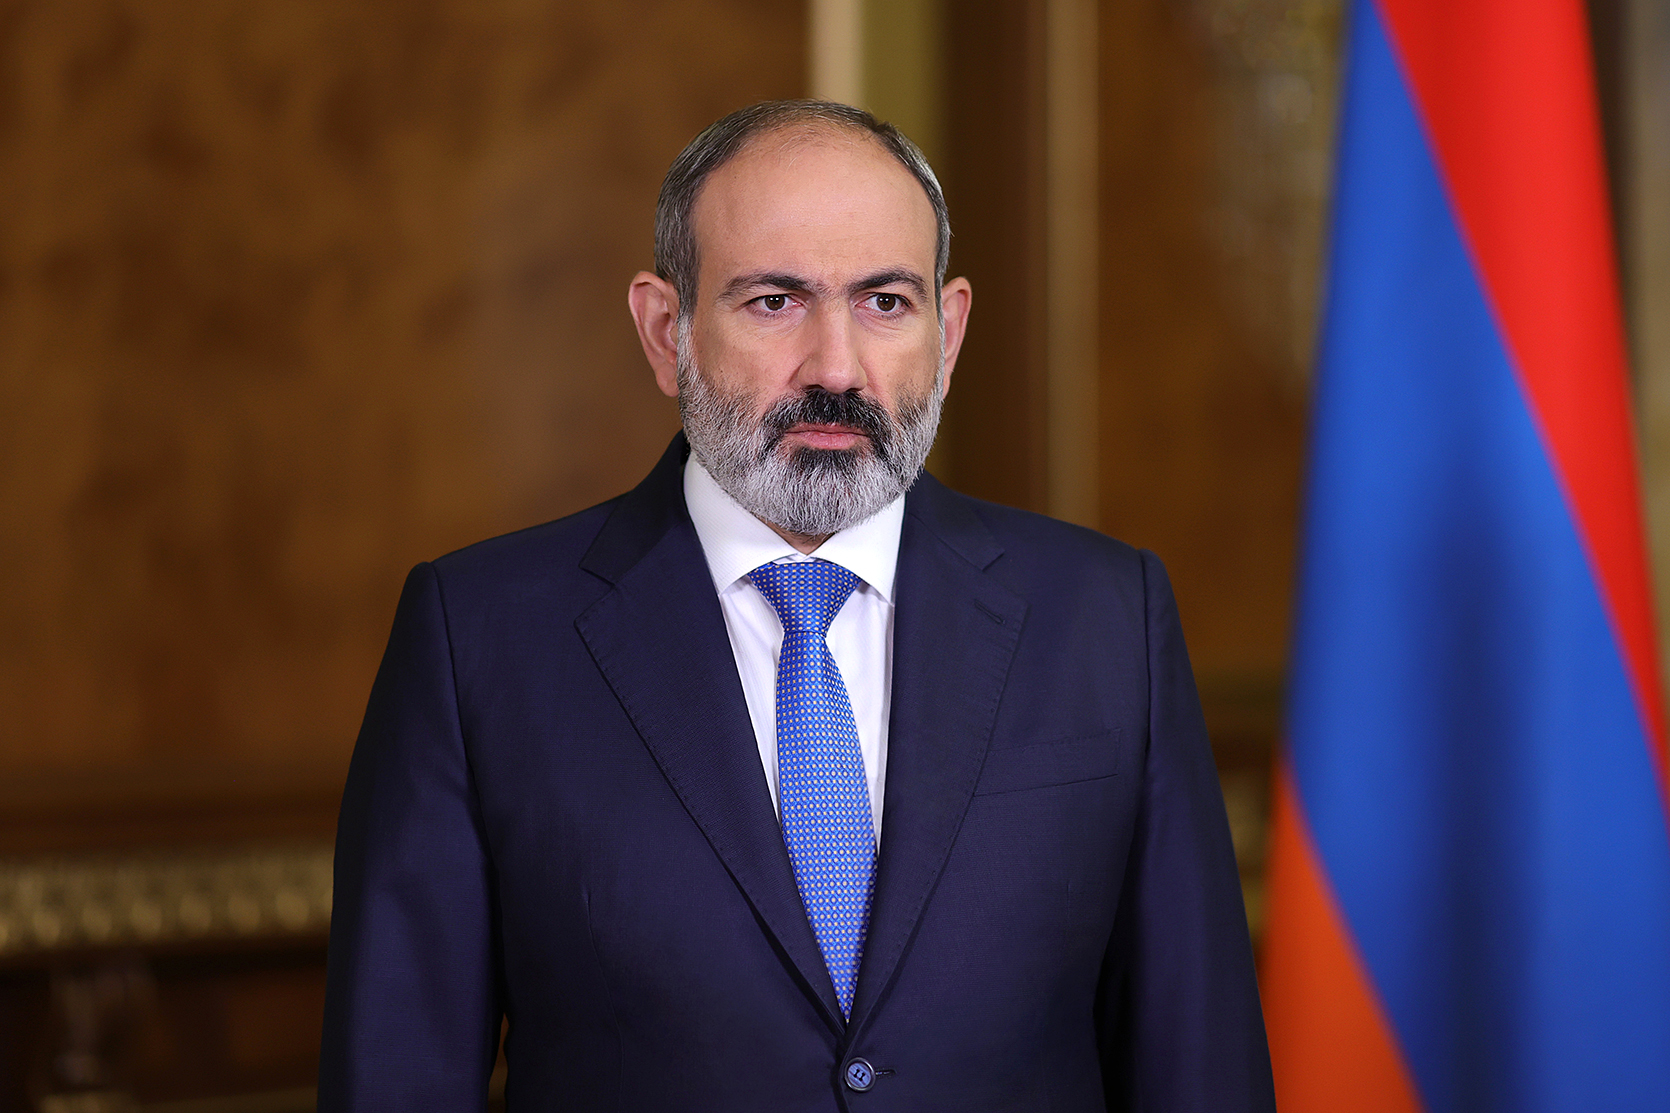 Pashinyan's speech at the 76th session of the UN General Assembly